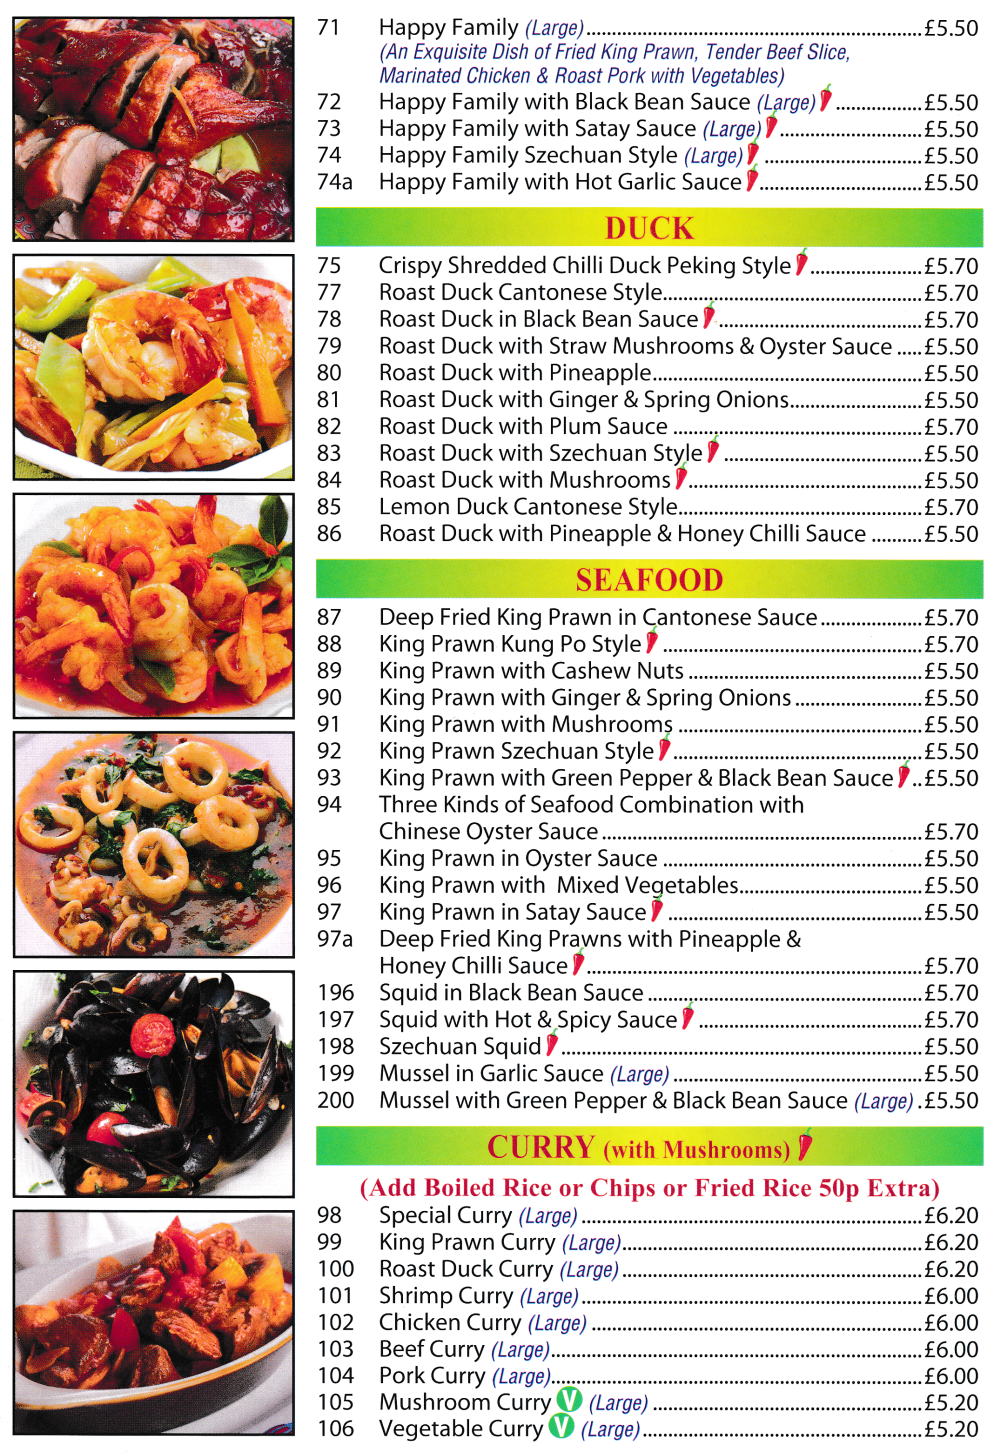 Menu for China Palace - Happy Family, Roast Duck Cantonese Style, King Prawn Kung Po Style, Special Curry, Szechuan Squid, Mussels in Garlic Sauce..